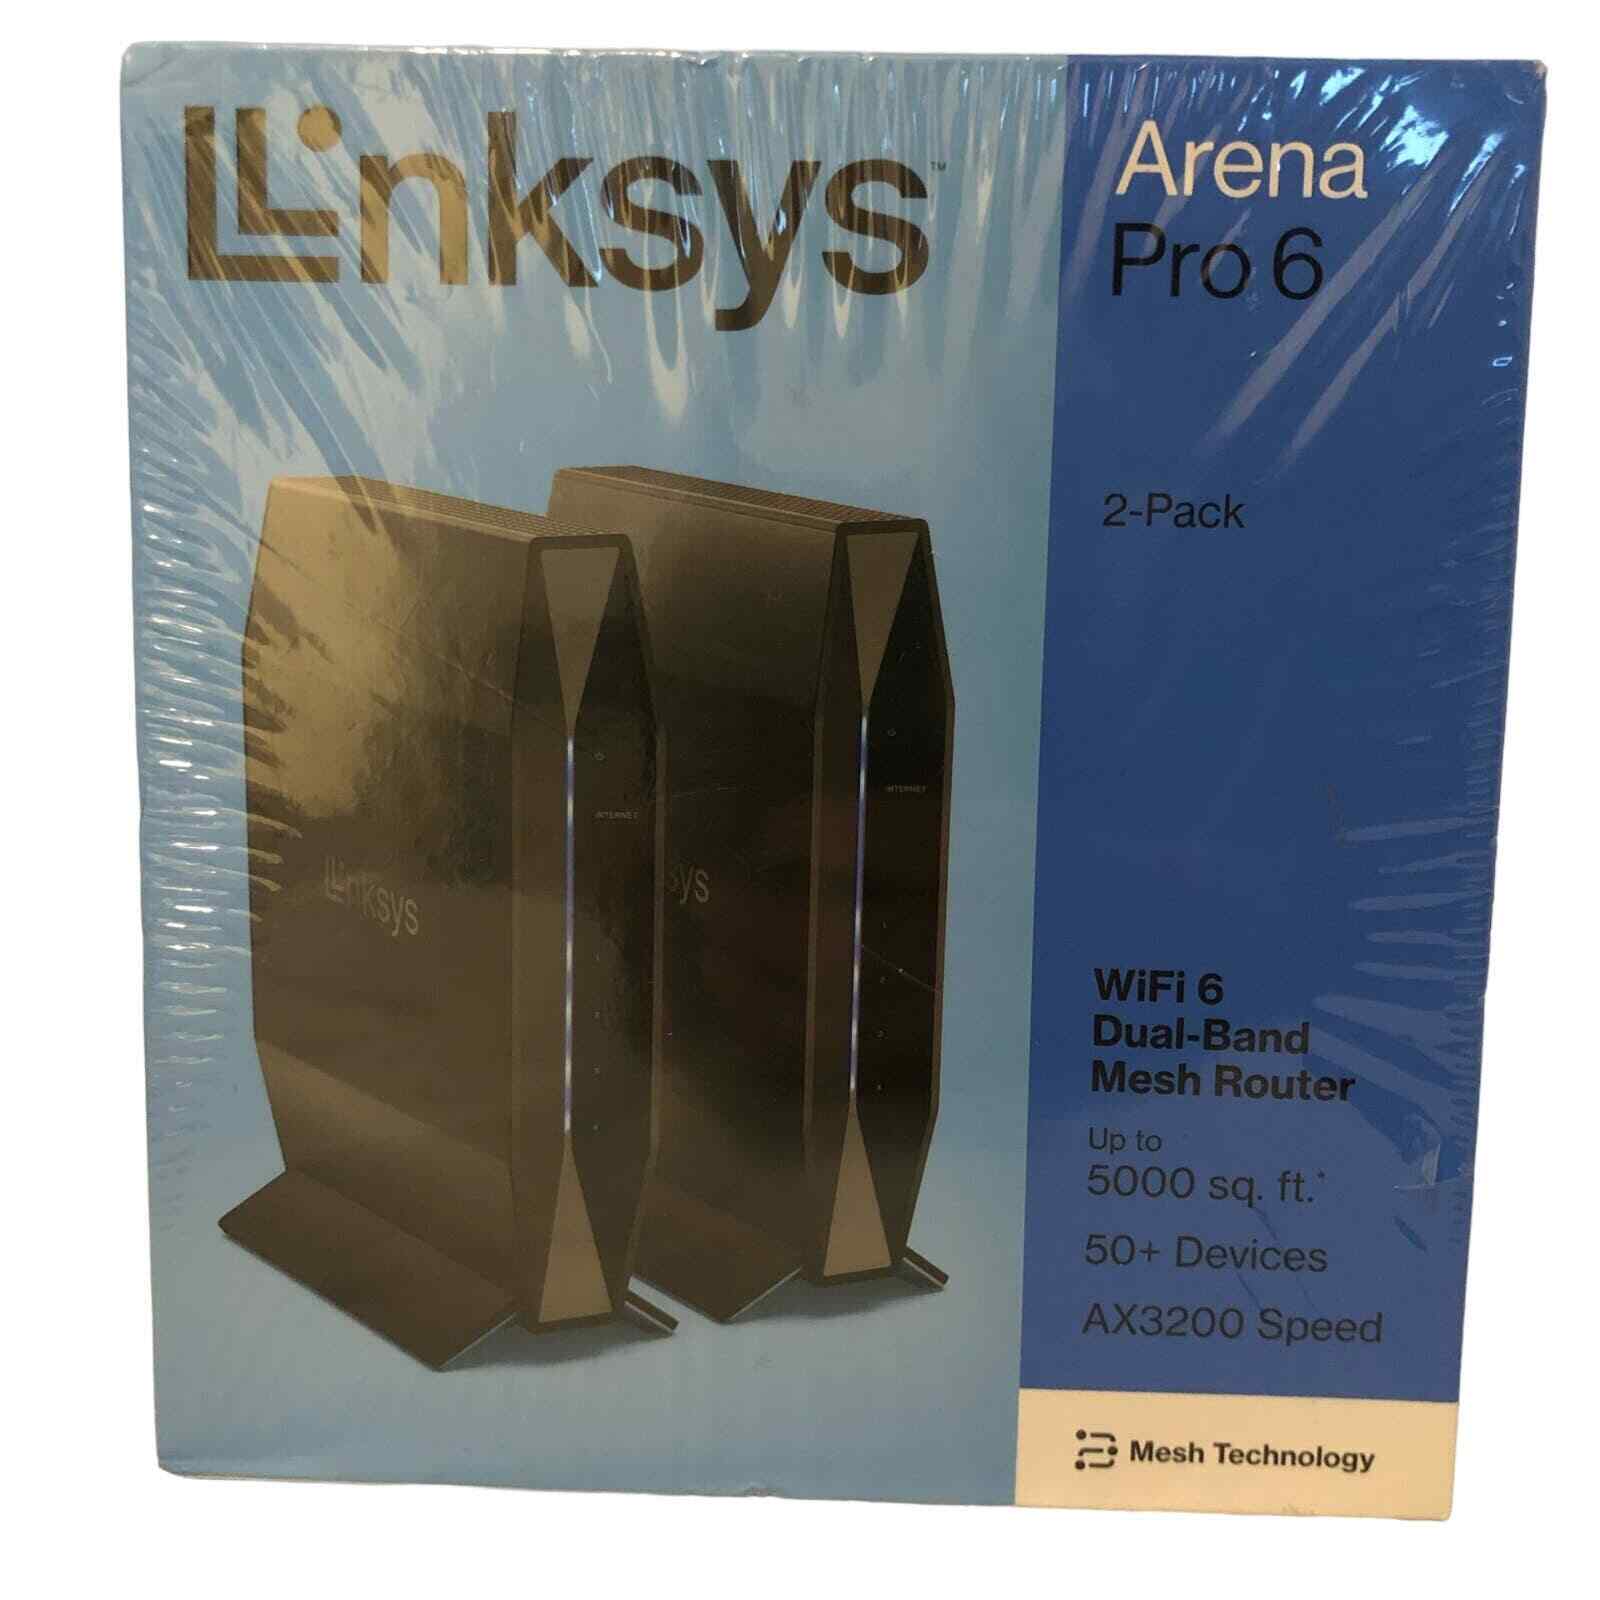 Linksys Arena Pro 6 WiFi Dual Band Mesh Router 2 Pack AX3200 System Brand